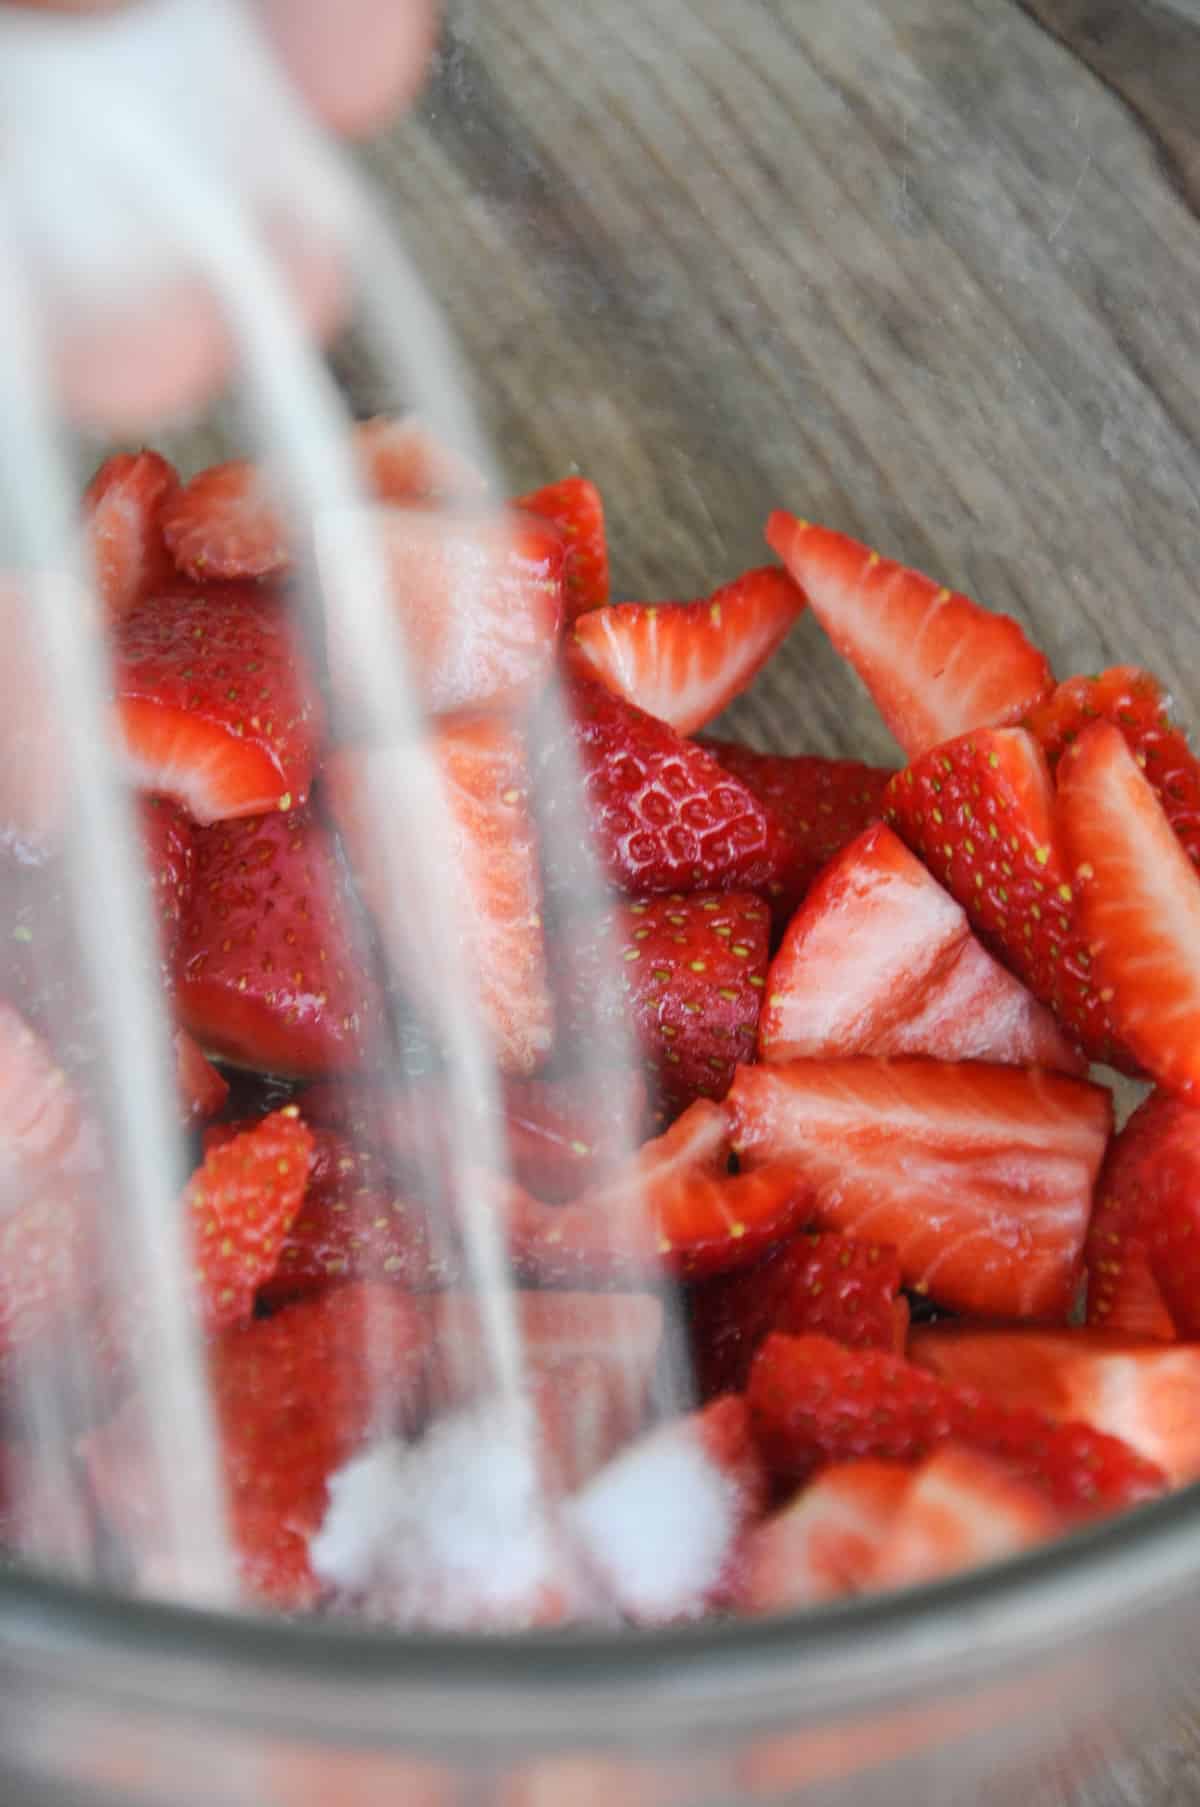 Sugar being poured over strawberries